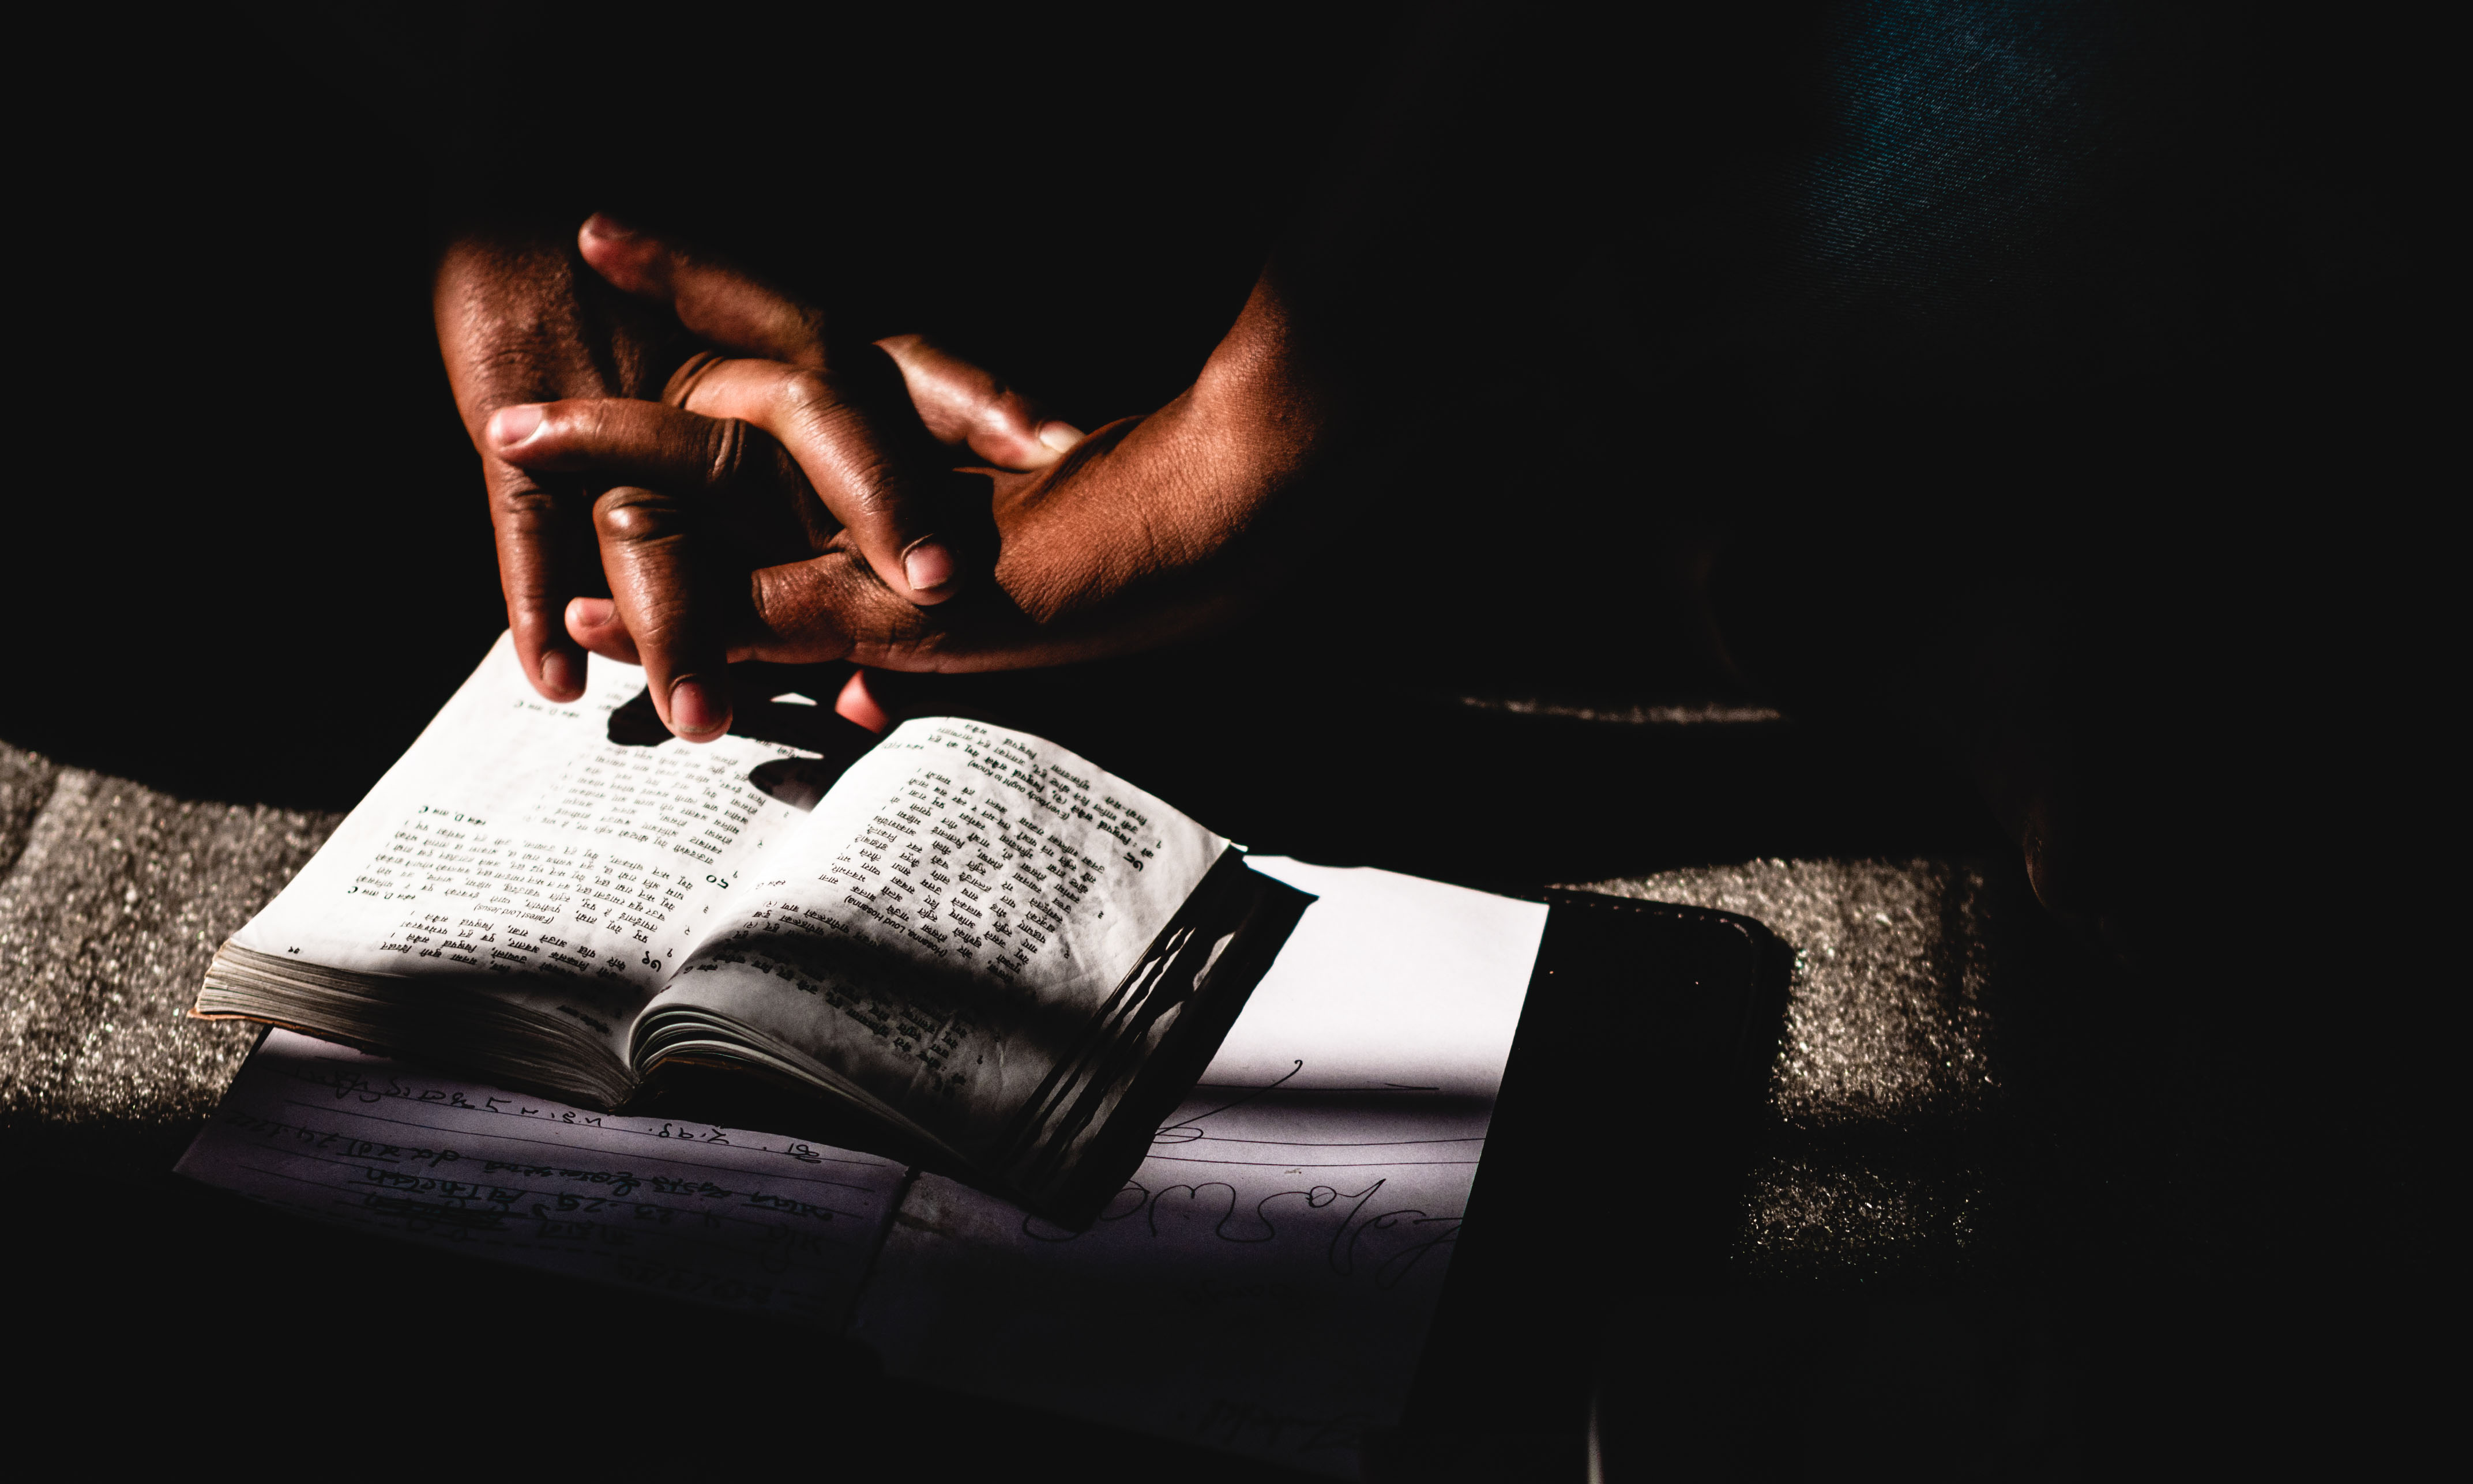 Hands folded on a Bible